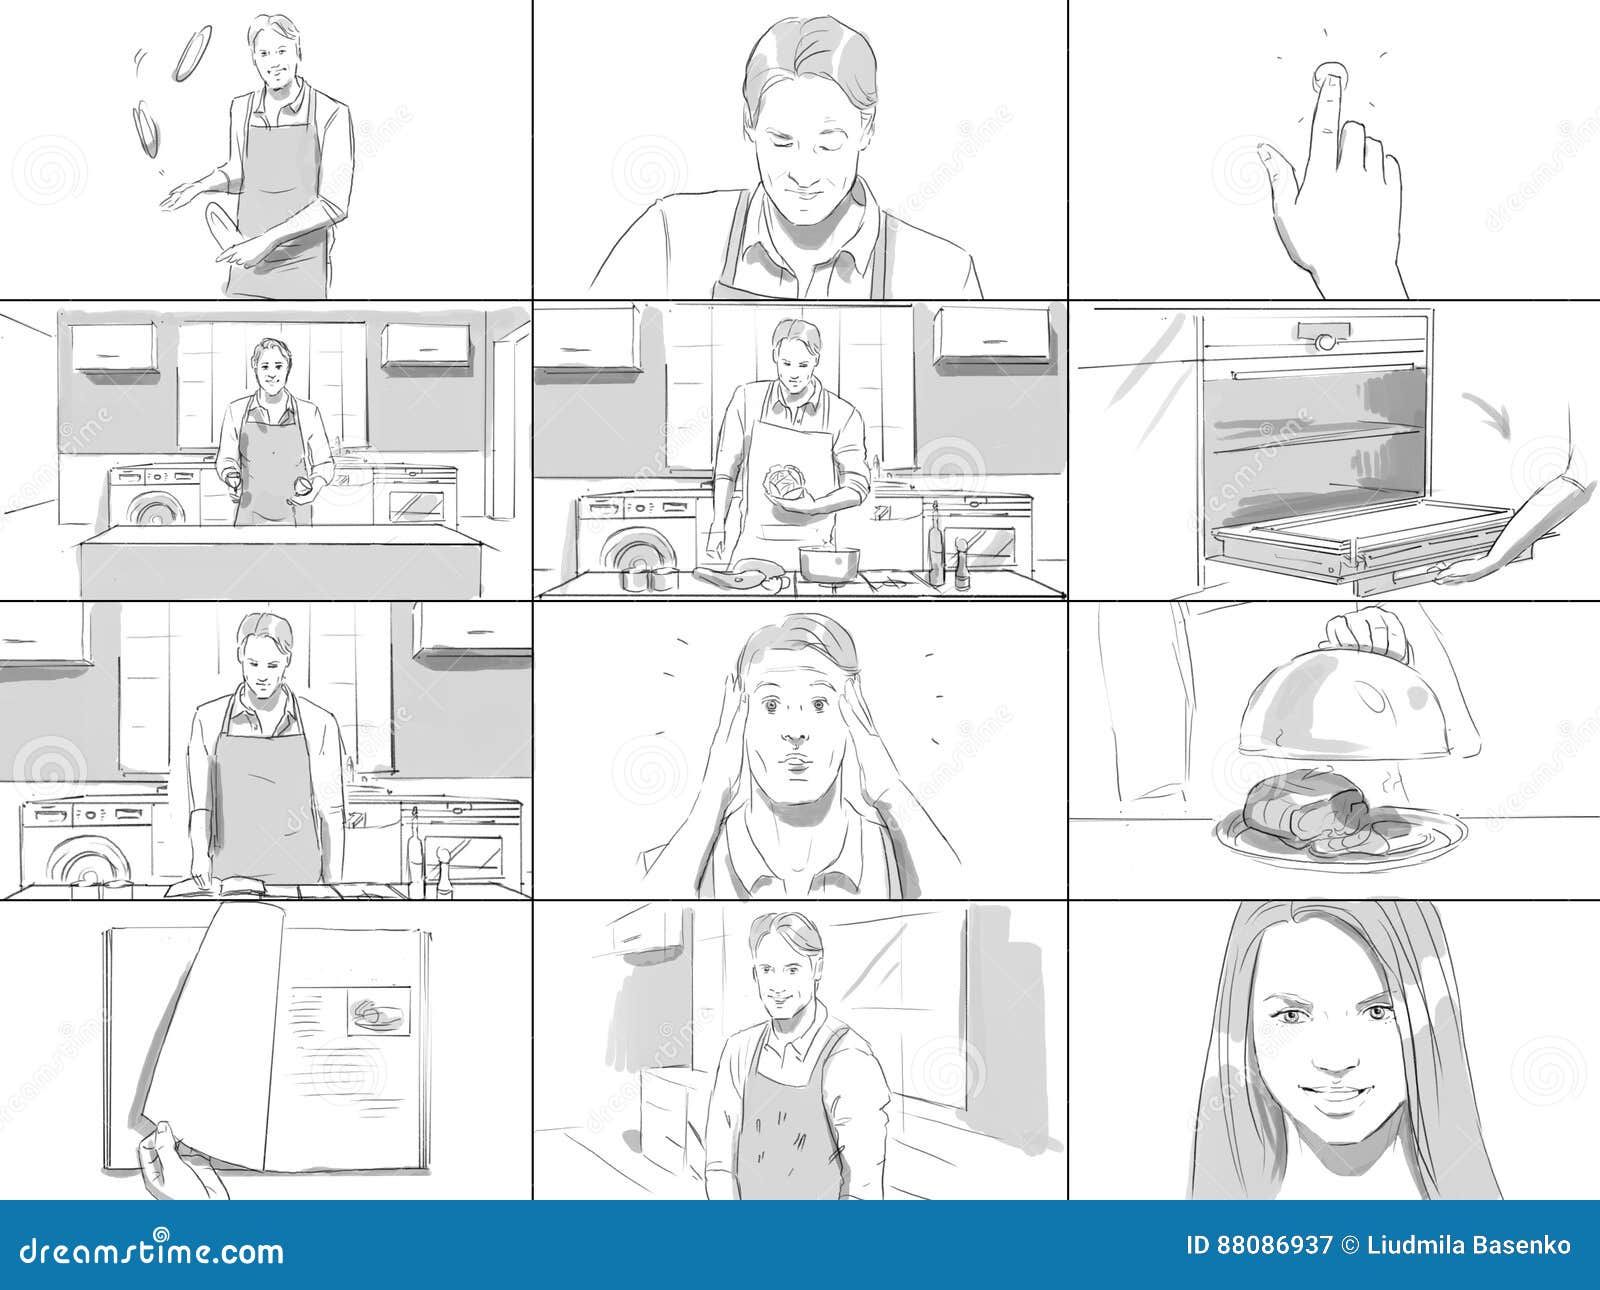 storyboard about man cooking